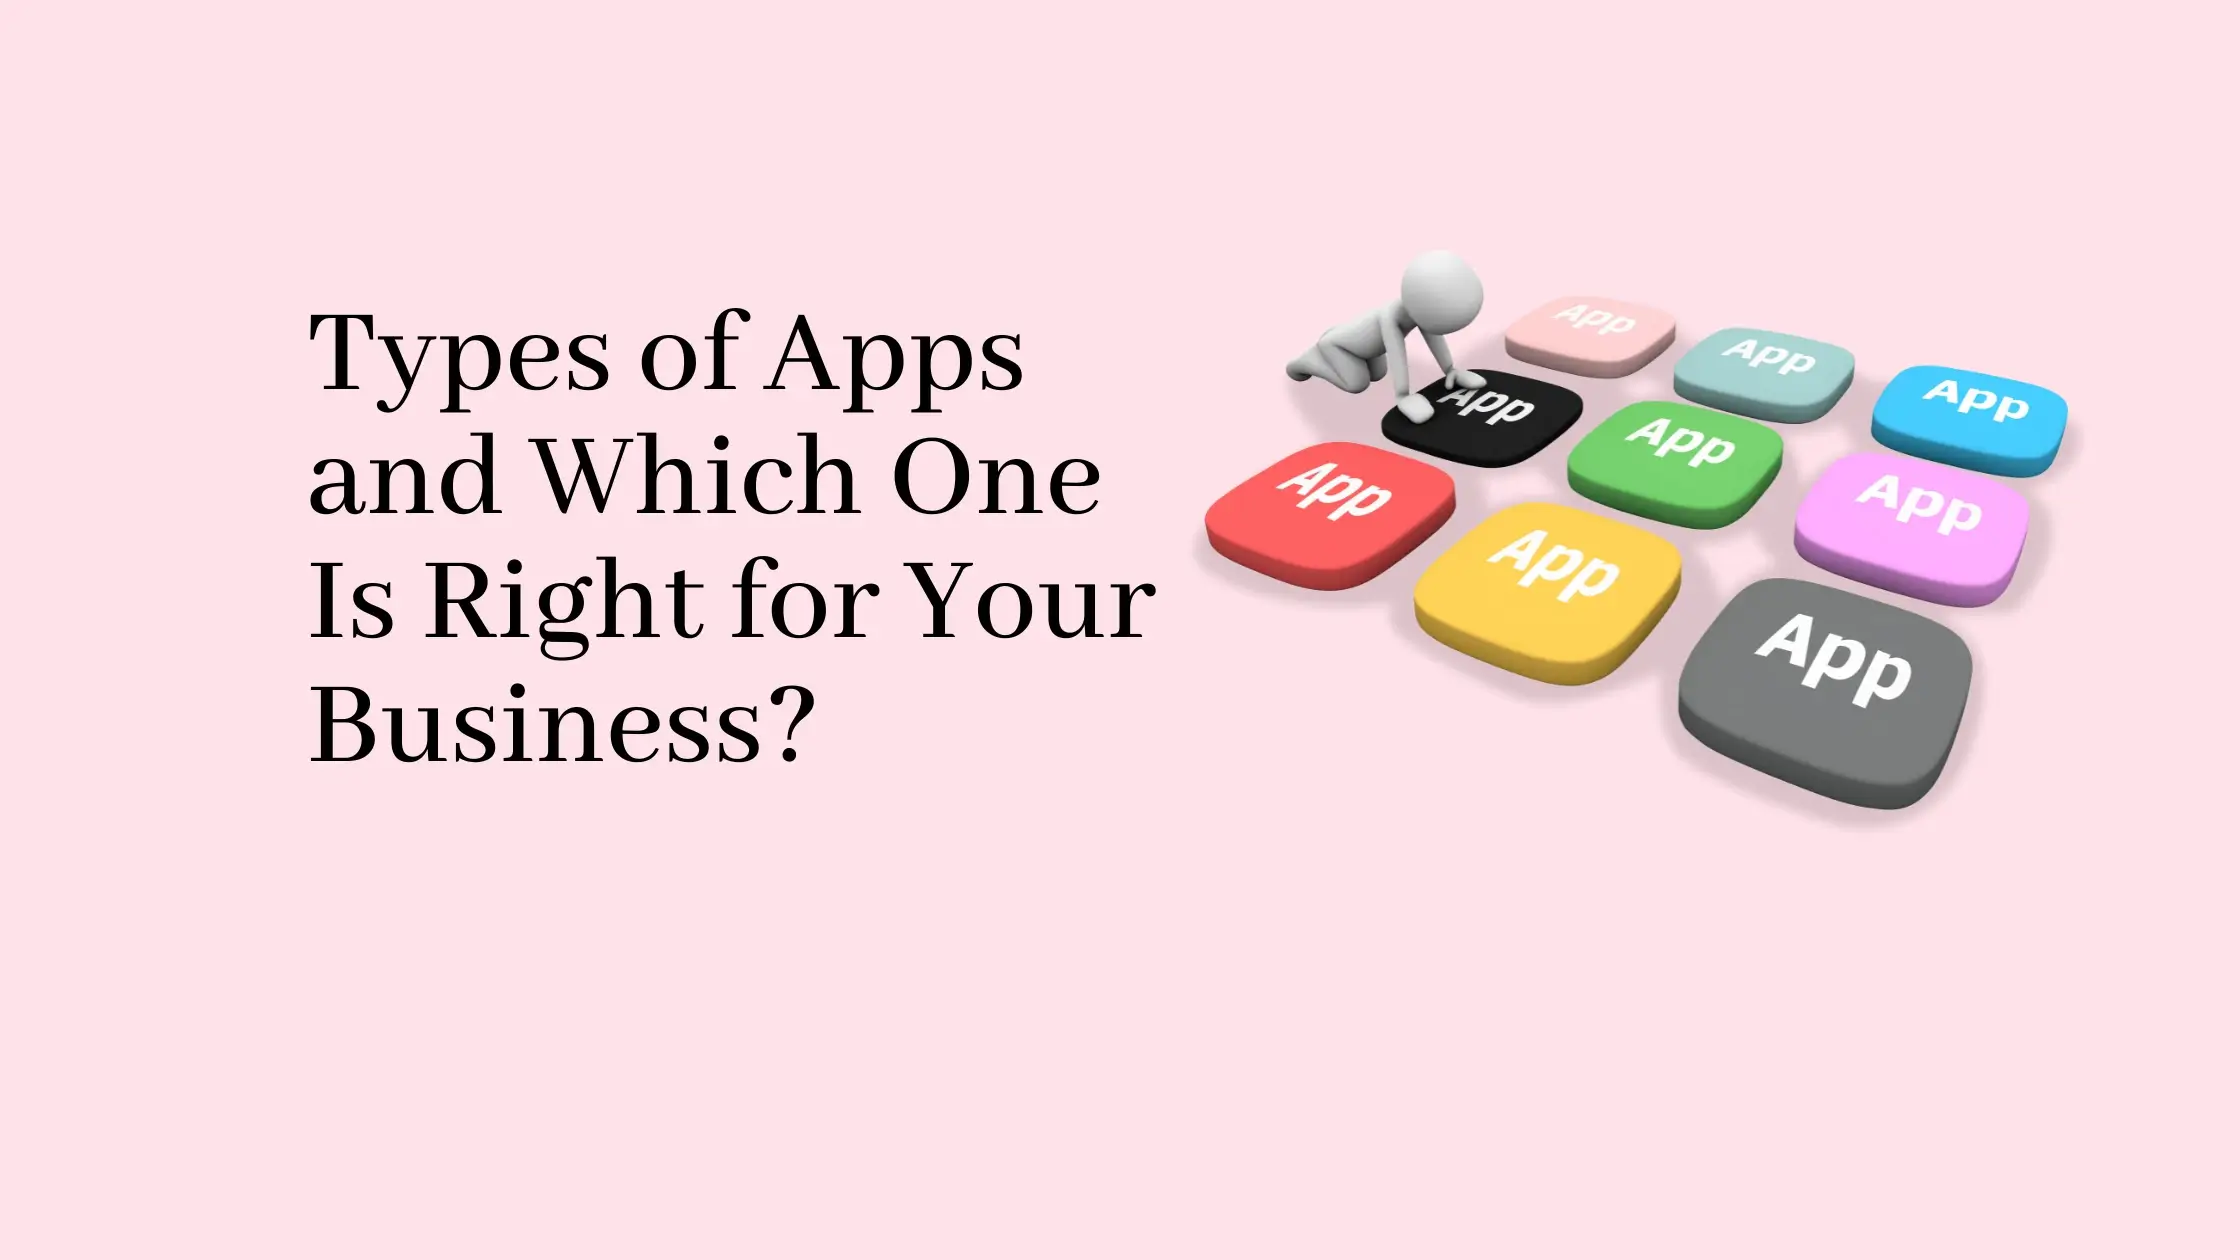 Types of Apps 1